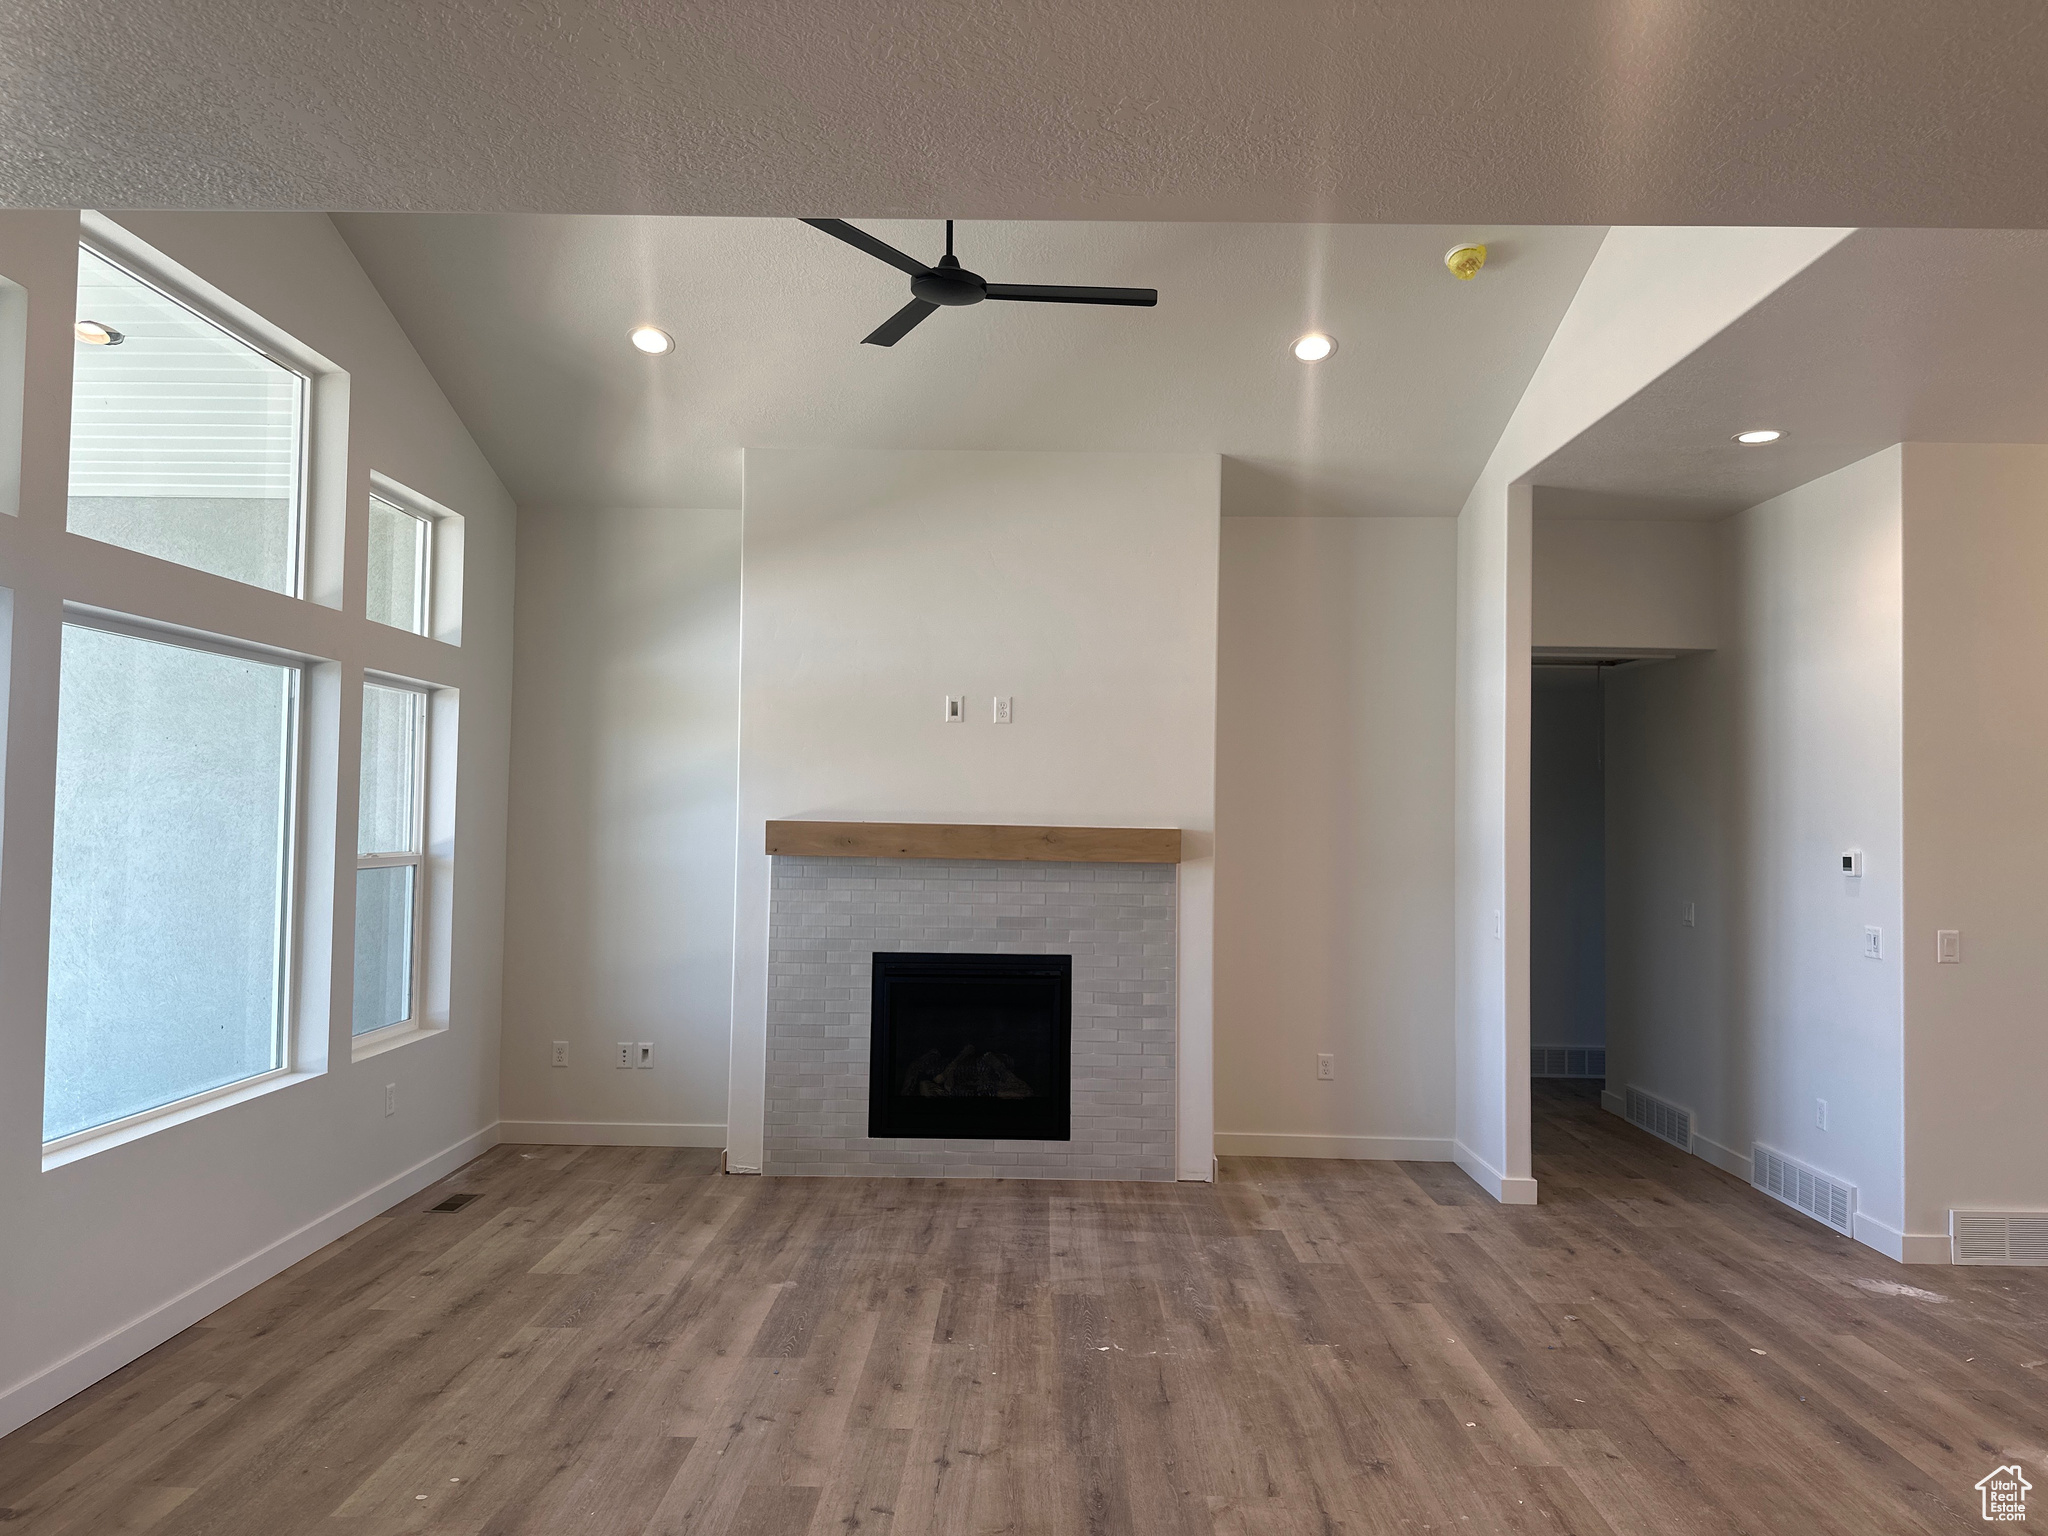 Unfurnished living room with ceiling fan, vaulted ceiling, and hardwood / wood-style flooring